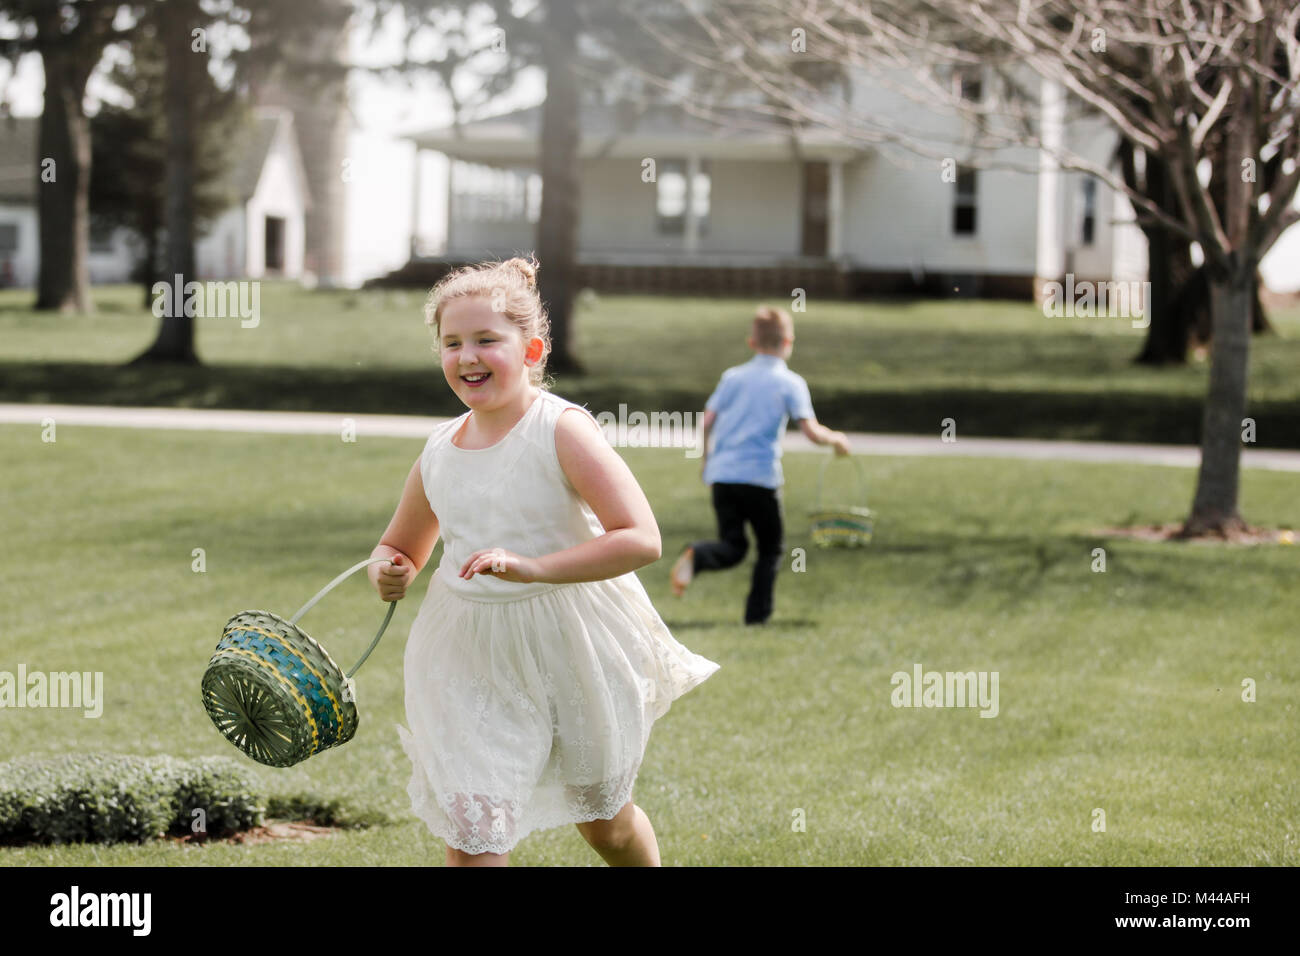 Girl and boy outdoors, holding Easter baskets, on Easter egg hunt Stock Photo